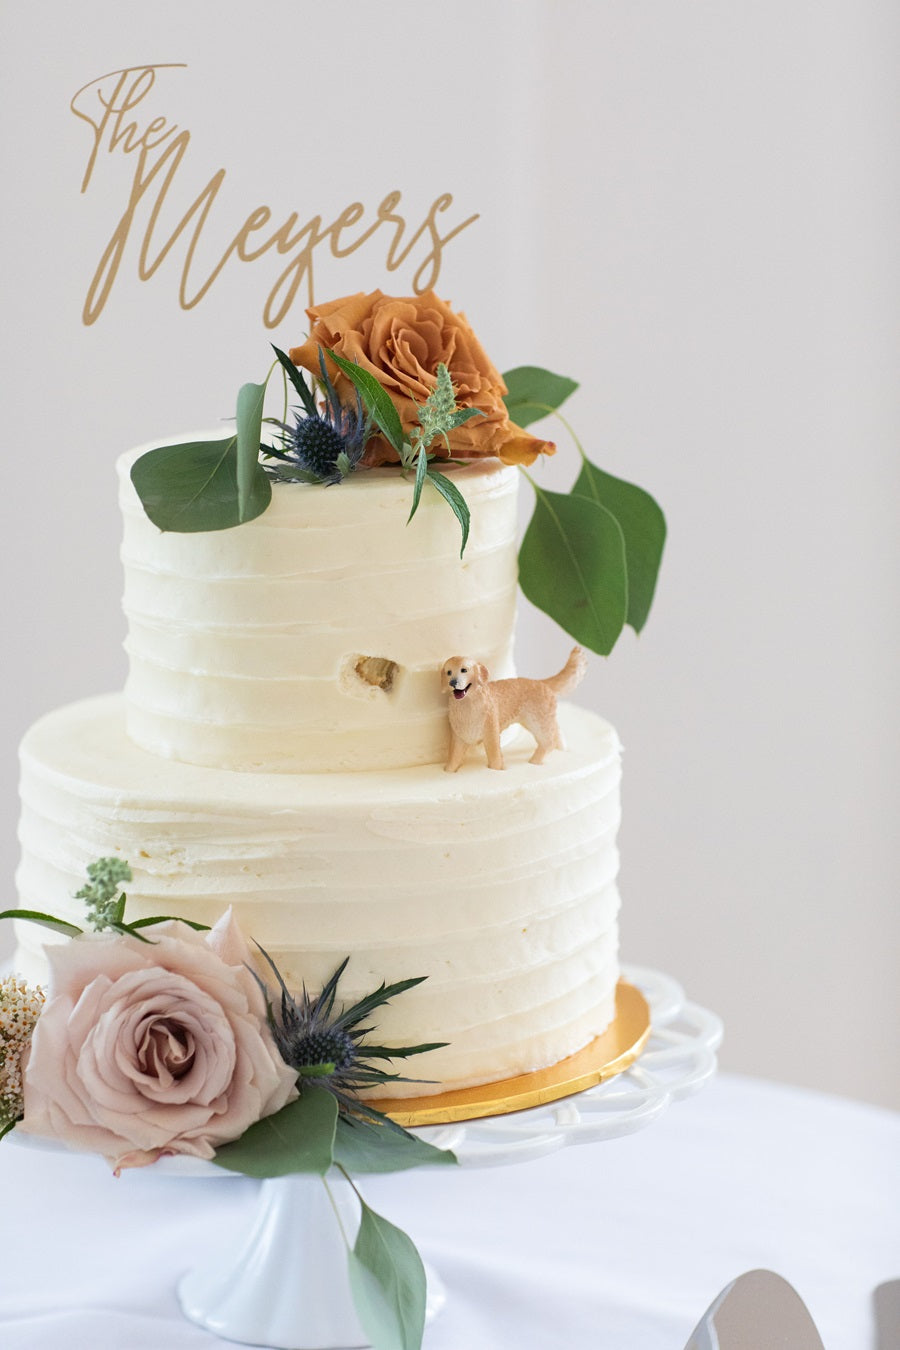 A white wedding cake with a toffee and a neutral lavender rose, accented with greenery. A dog figurine is placed on the side next to a small hole that implies it was eating the cake.